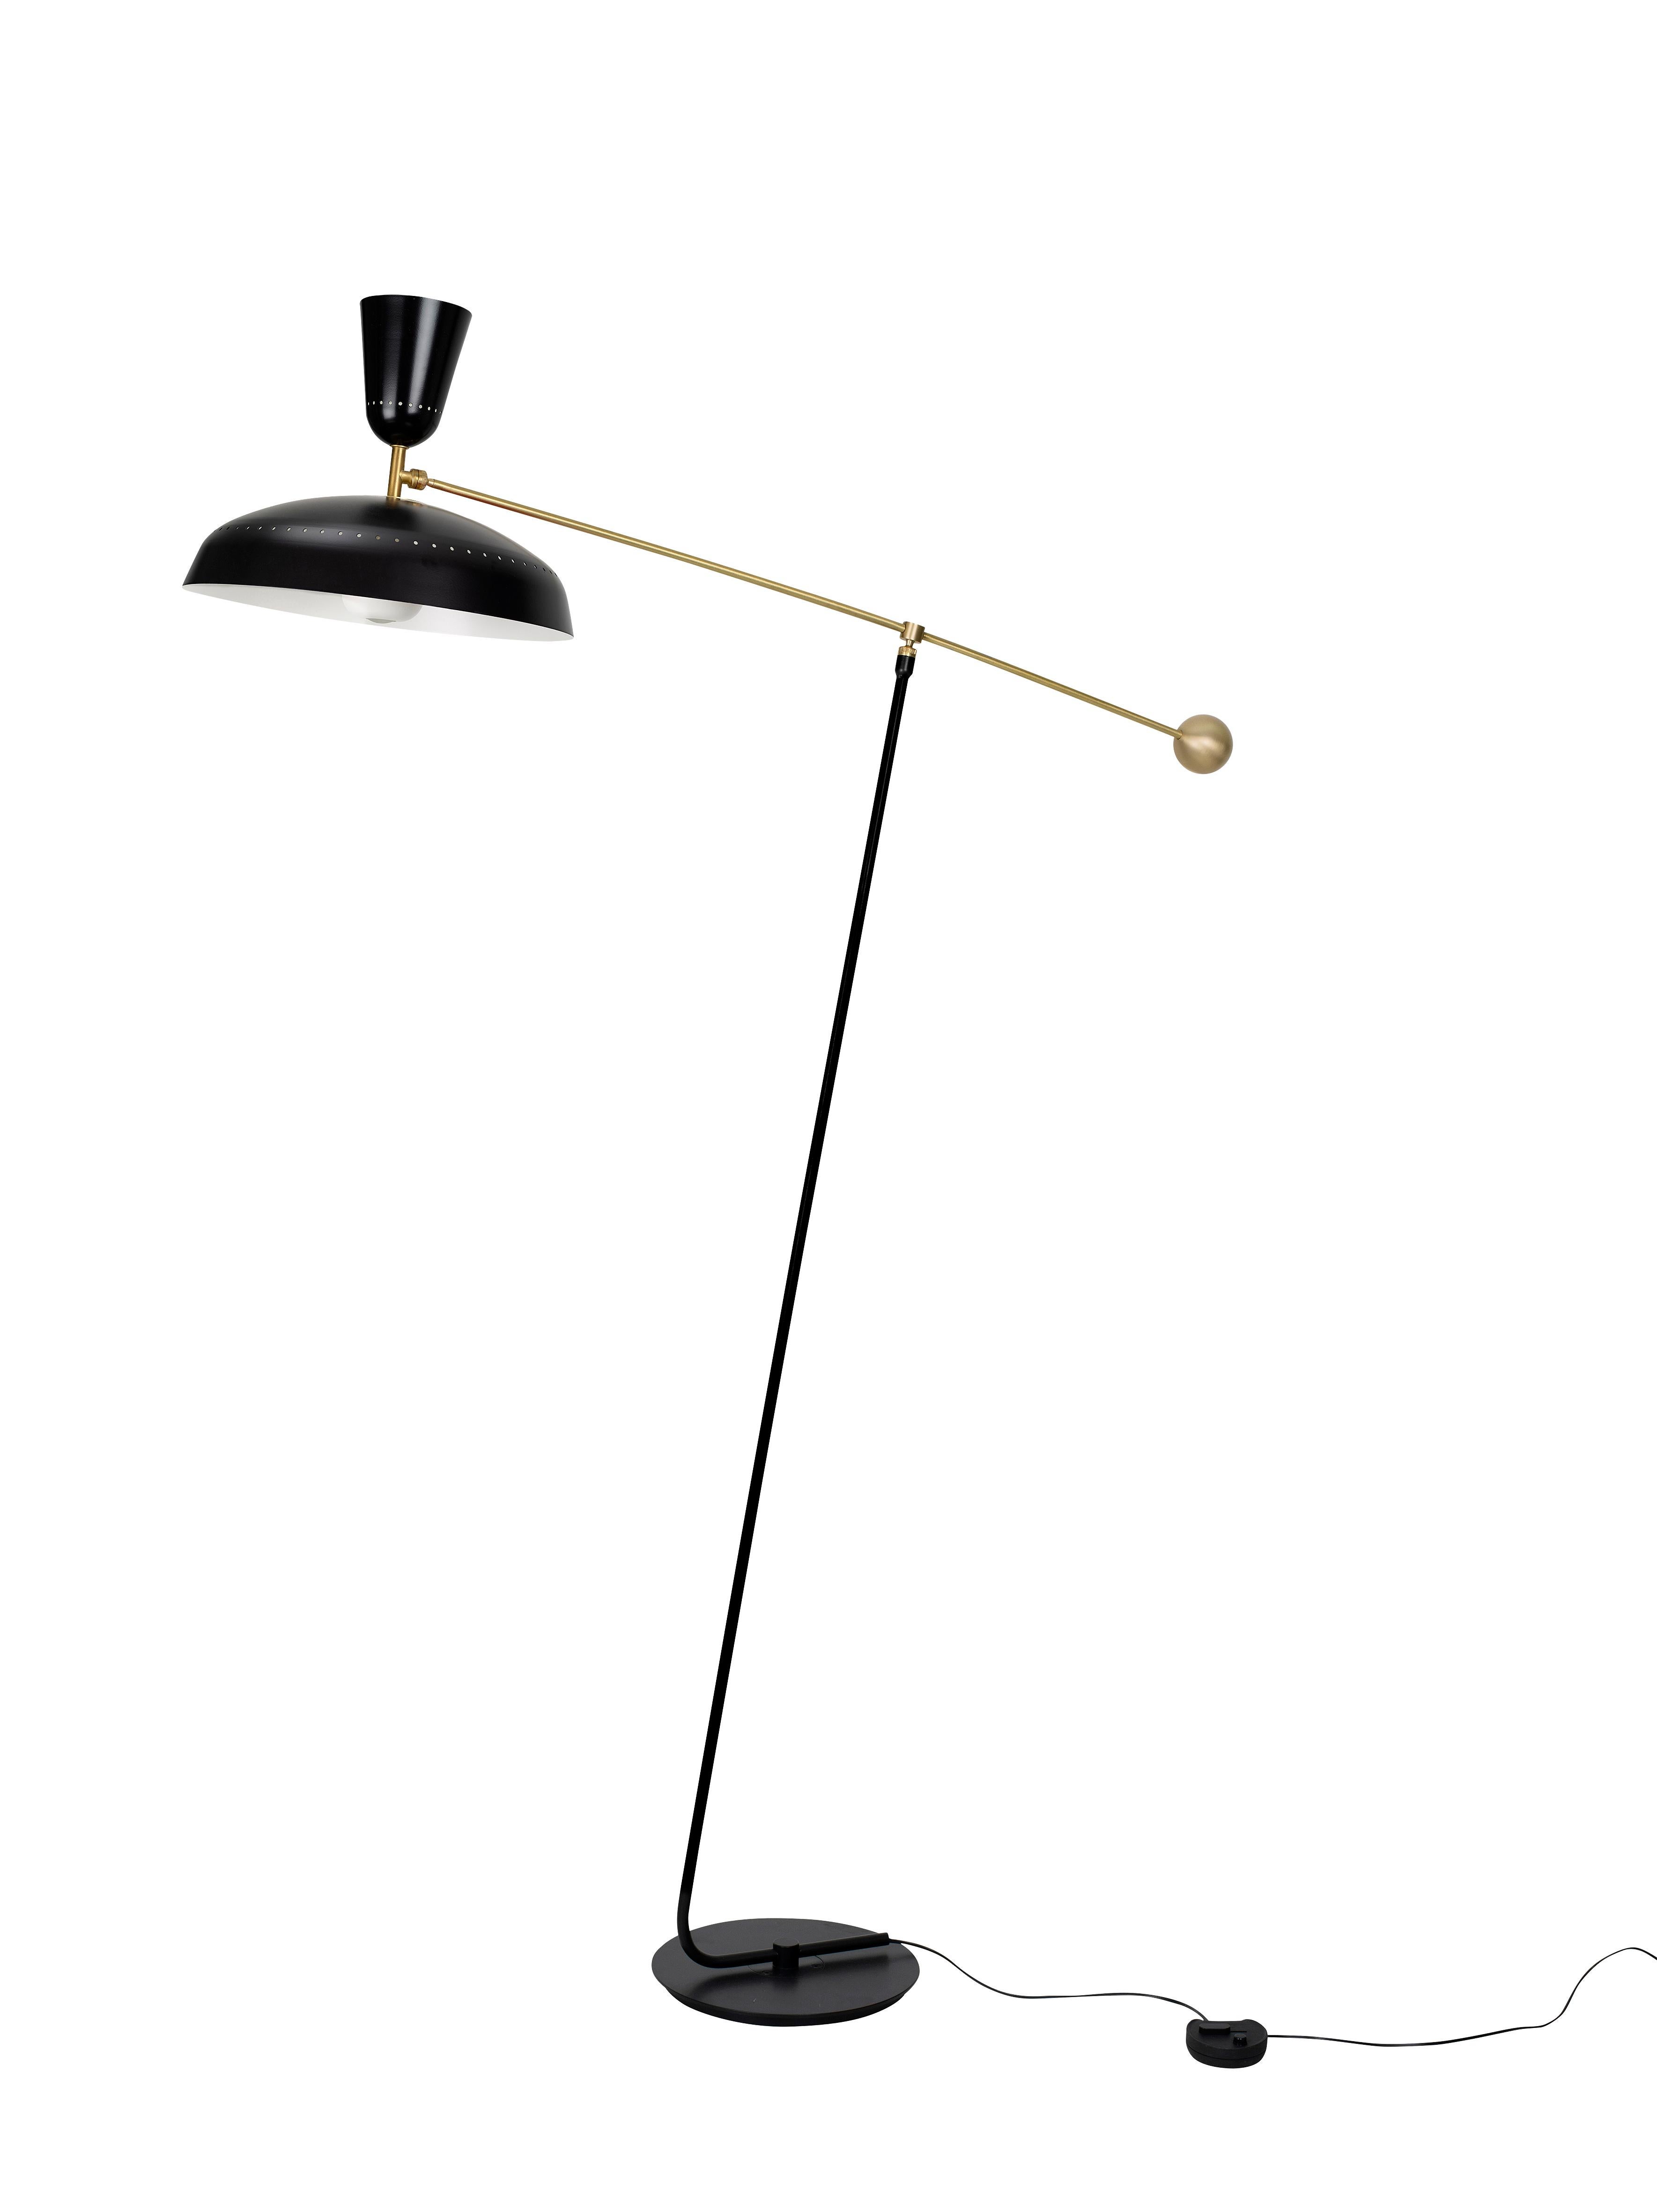 Large Pierre Guariche 'G1' Floor Lamp for Sammode Studio in Black For Sale 9